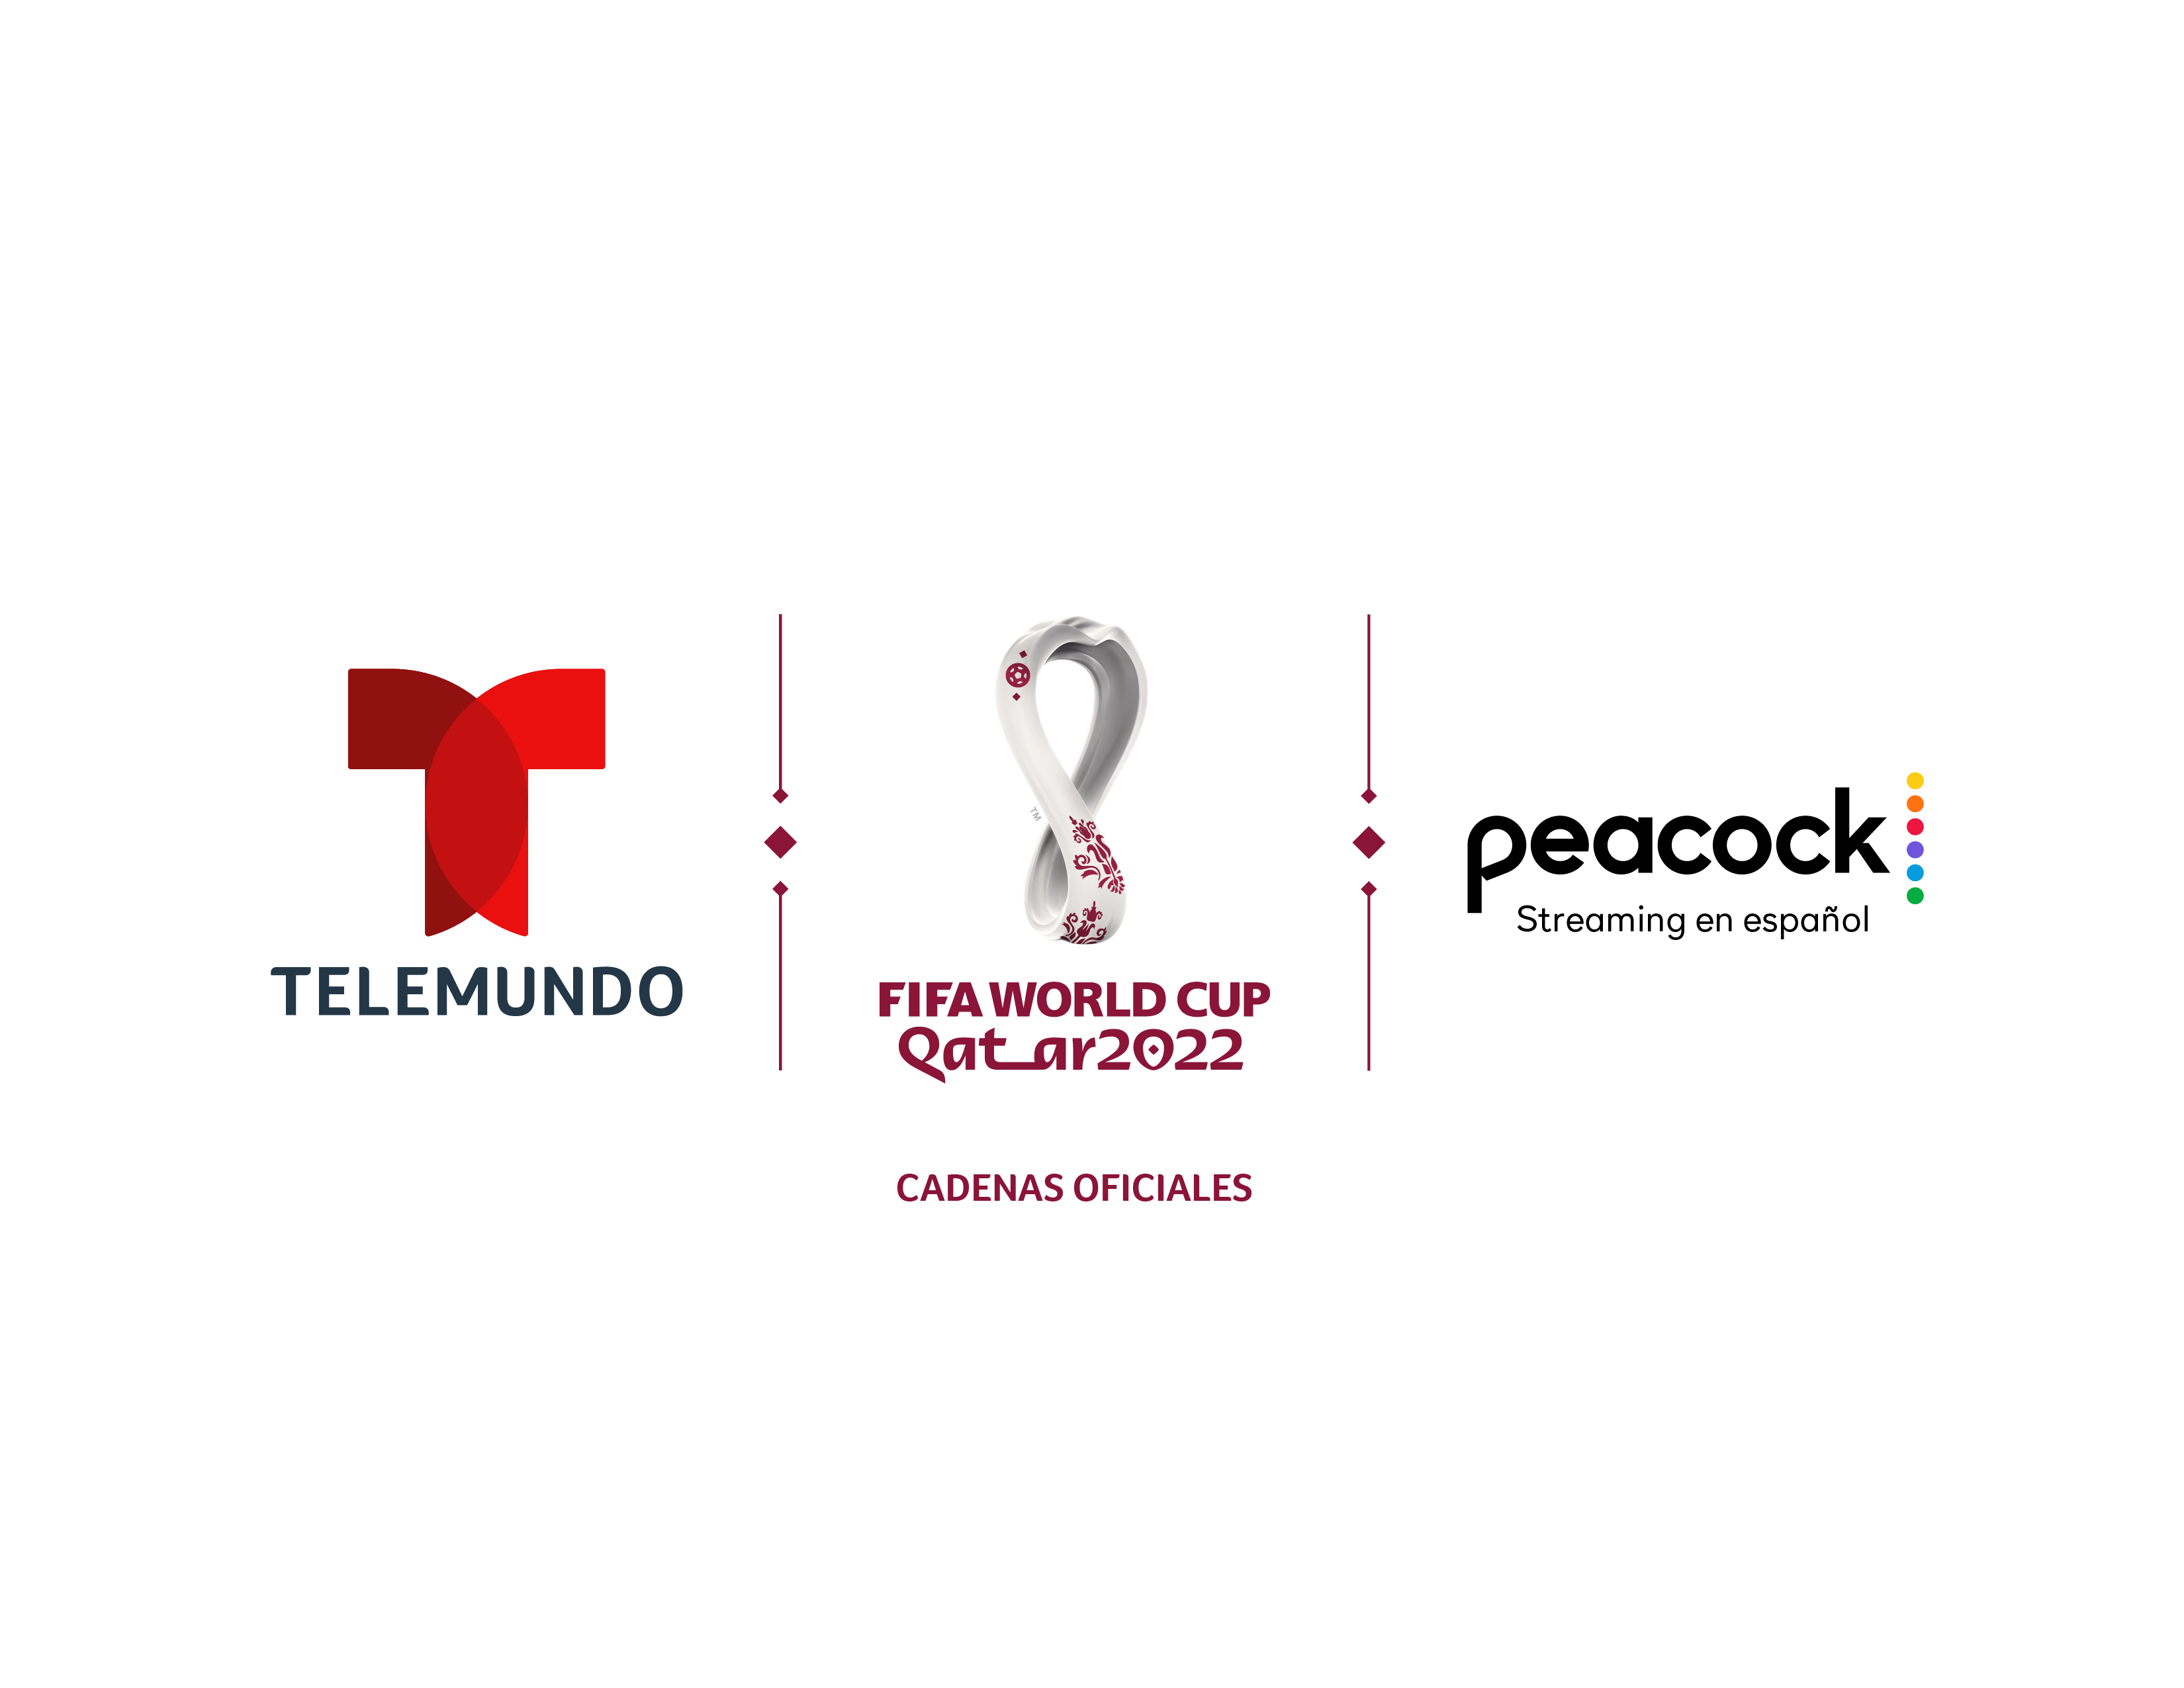 TELEMUNDO SURROUNDS FIFA WORLD CUP QATAR 2022™ WITH MOST AMBITIOUS COVERAGE and PRODUCTION EVER